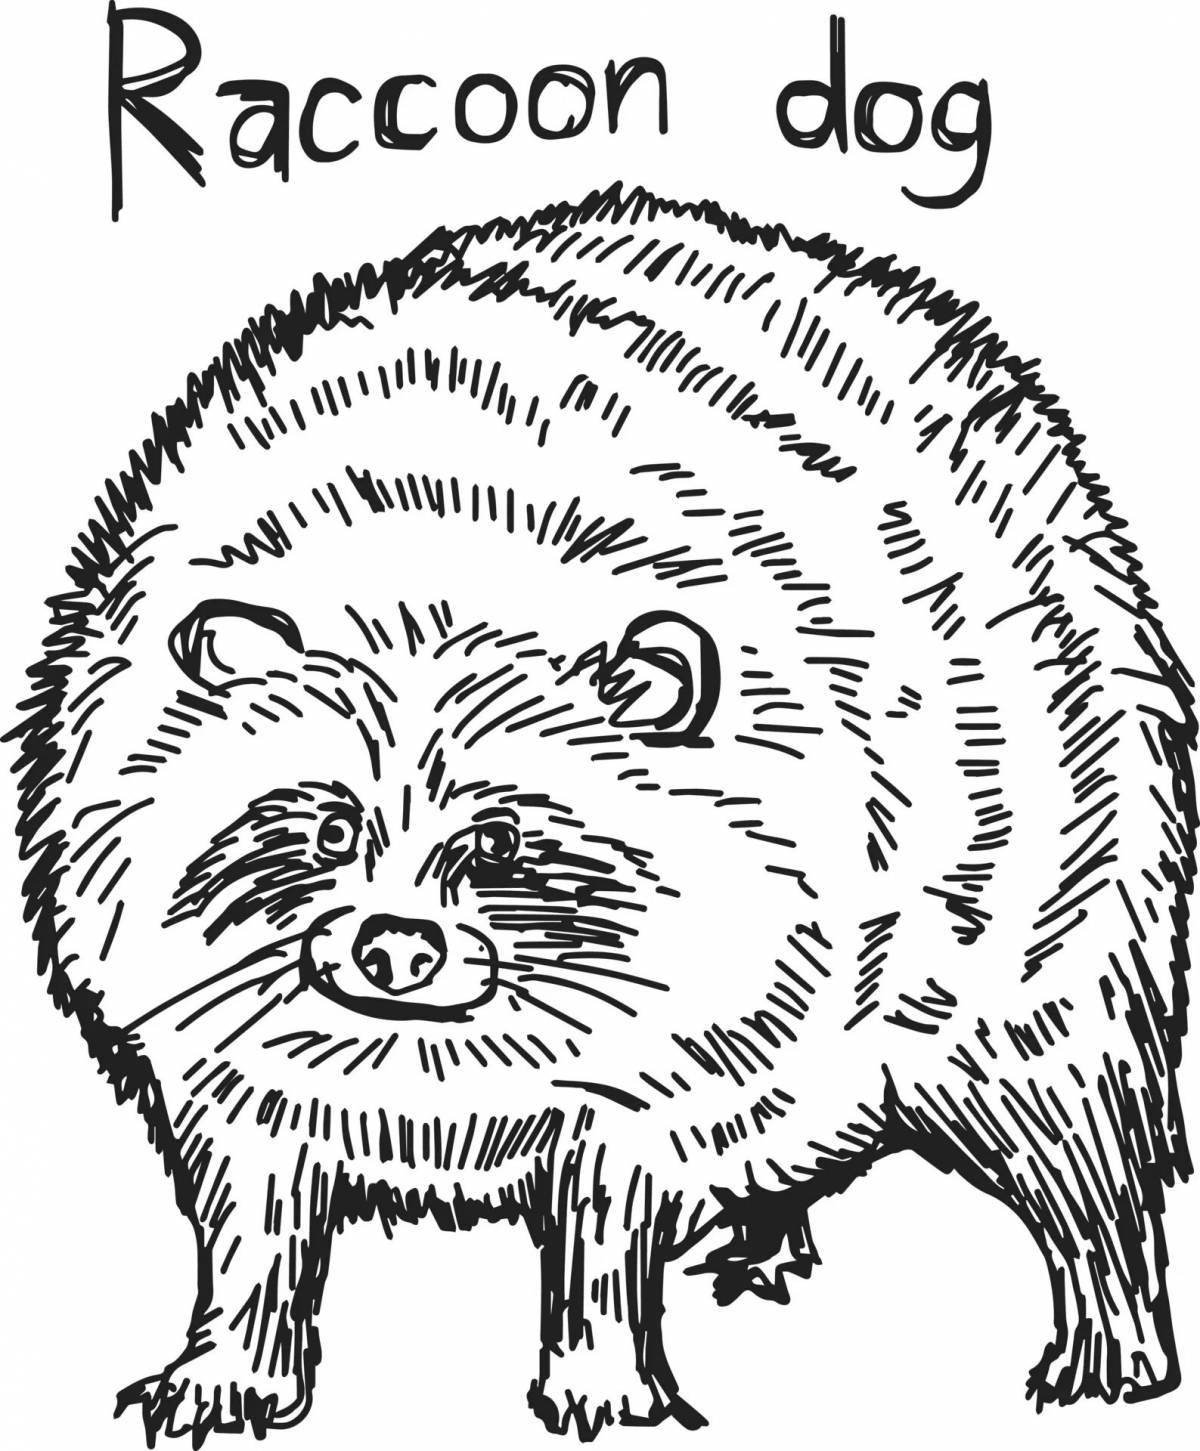 Adorable raccoon dog coloring page